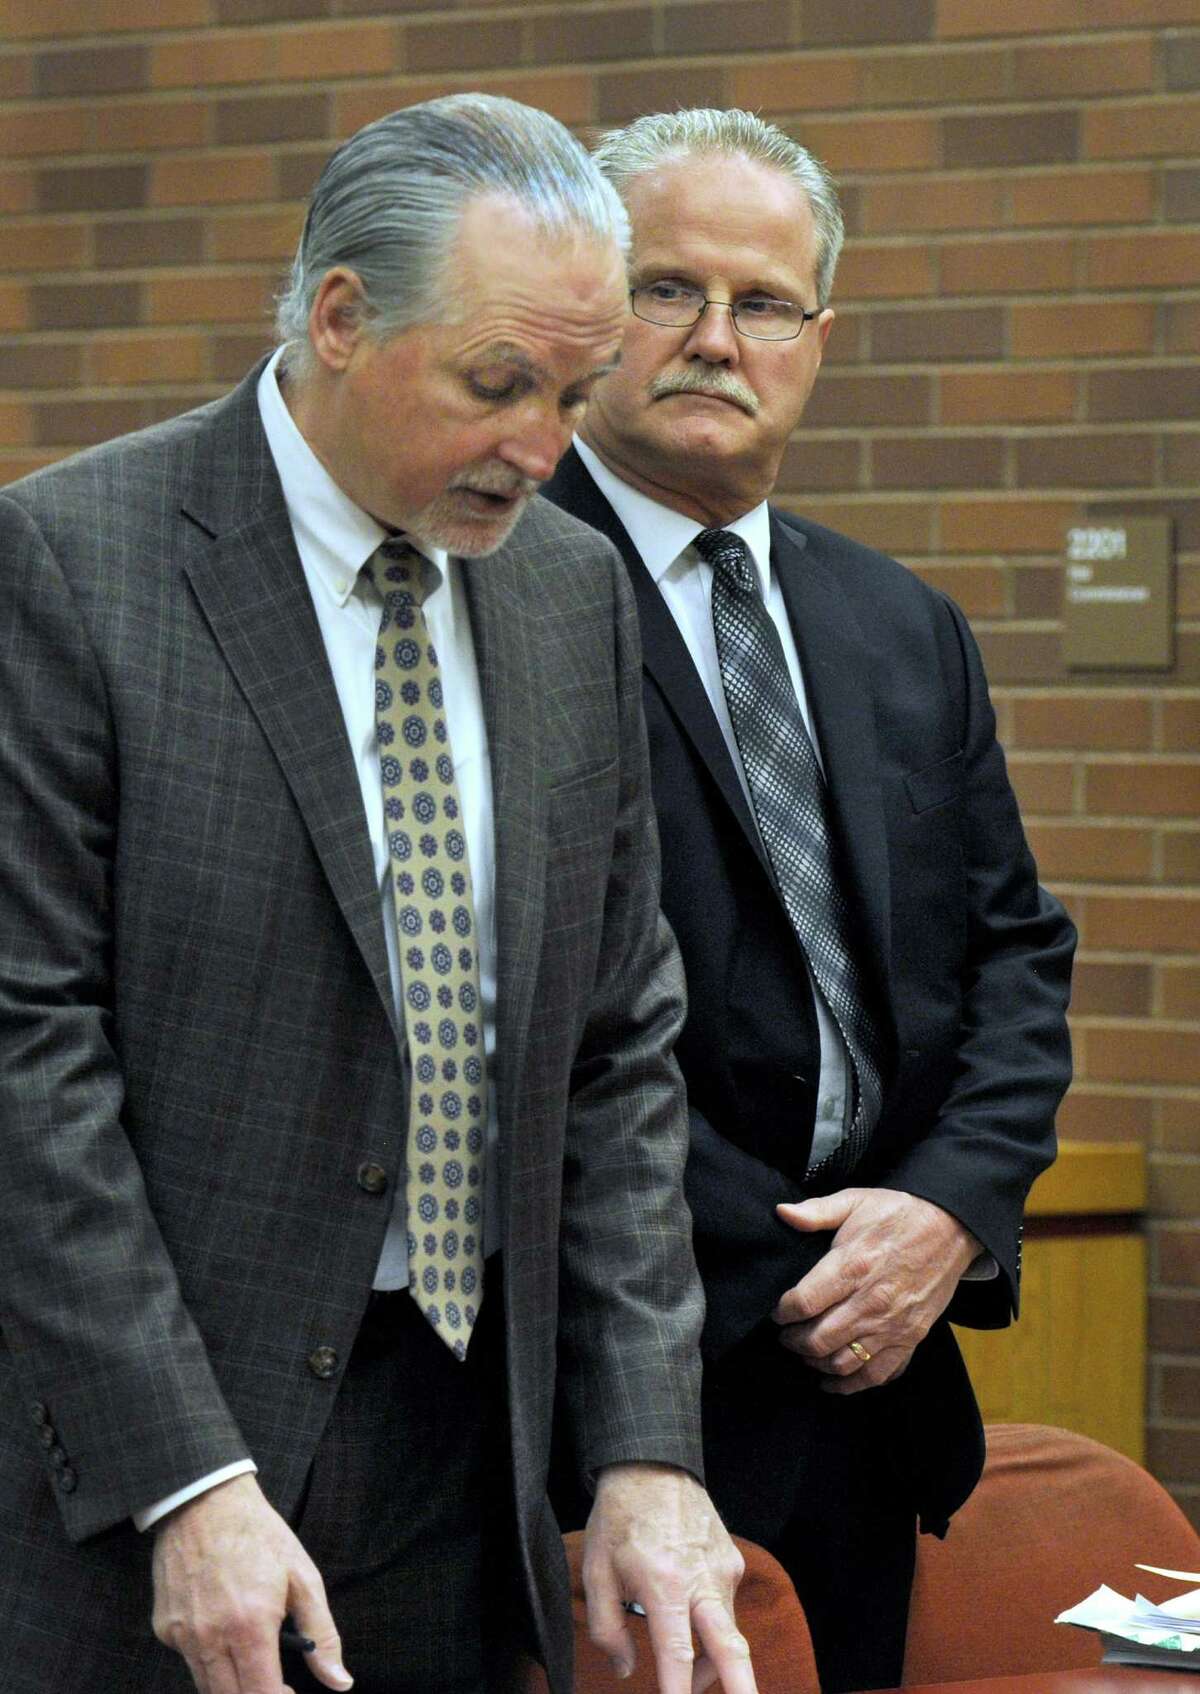 Brookfield’s former school finance director Art Colley, right, appears in Superior Court in Danbury, Conn., Wednesday morning, March 25, 2015, alongside his attorney, Eugene Riccio.